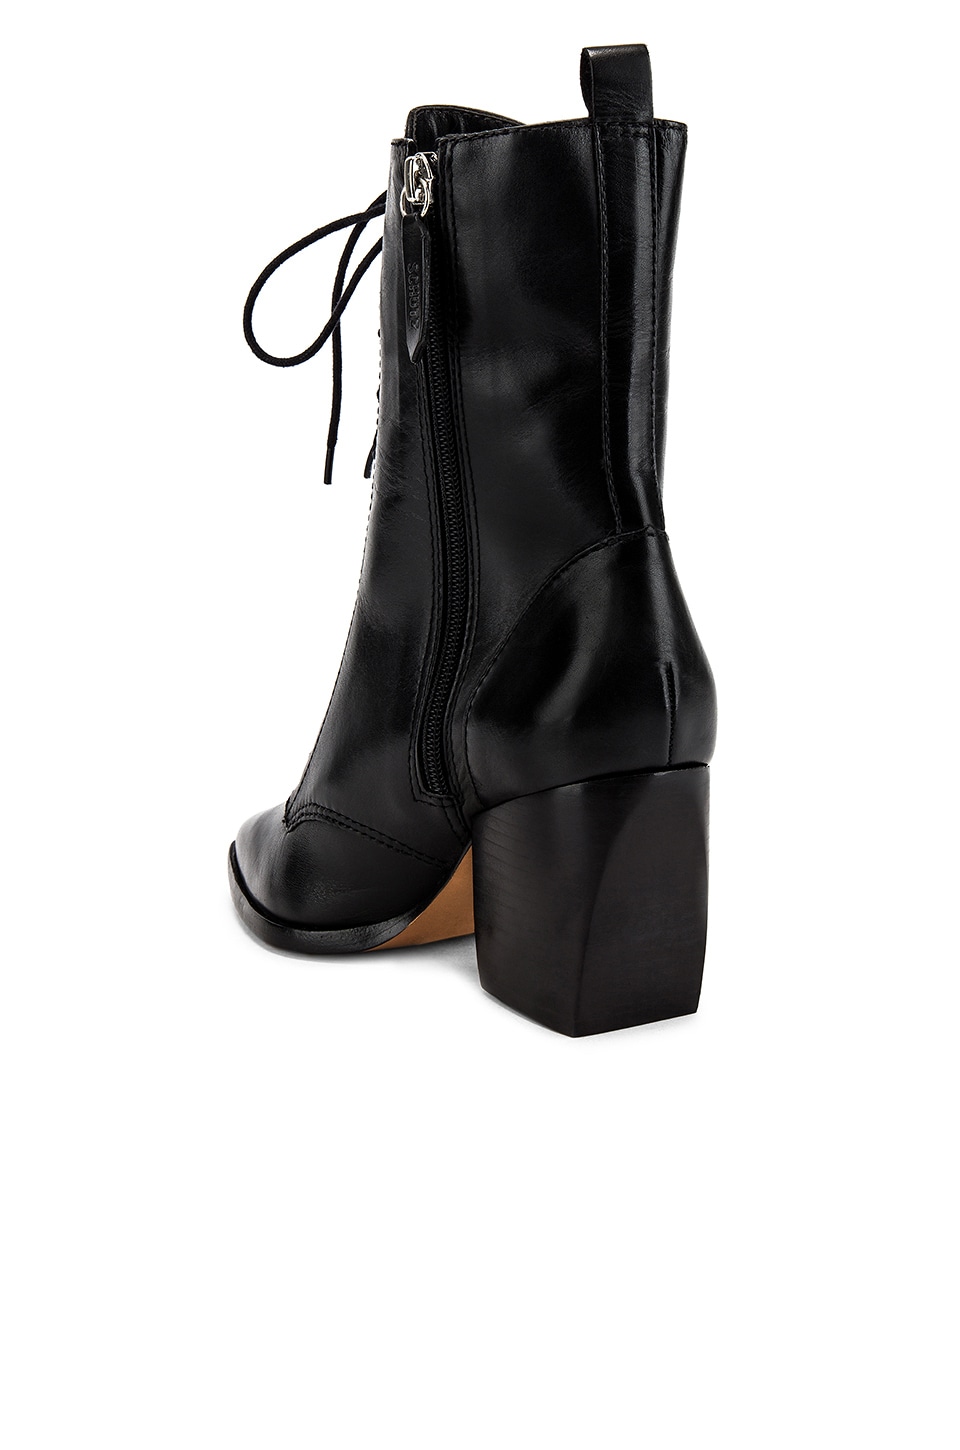 Schutz Lace Up Boot in Black | REVOLVE